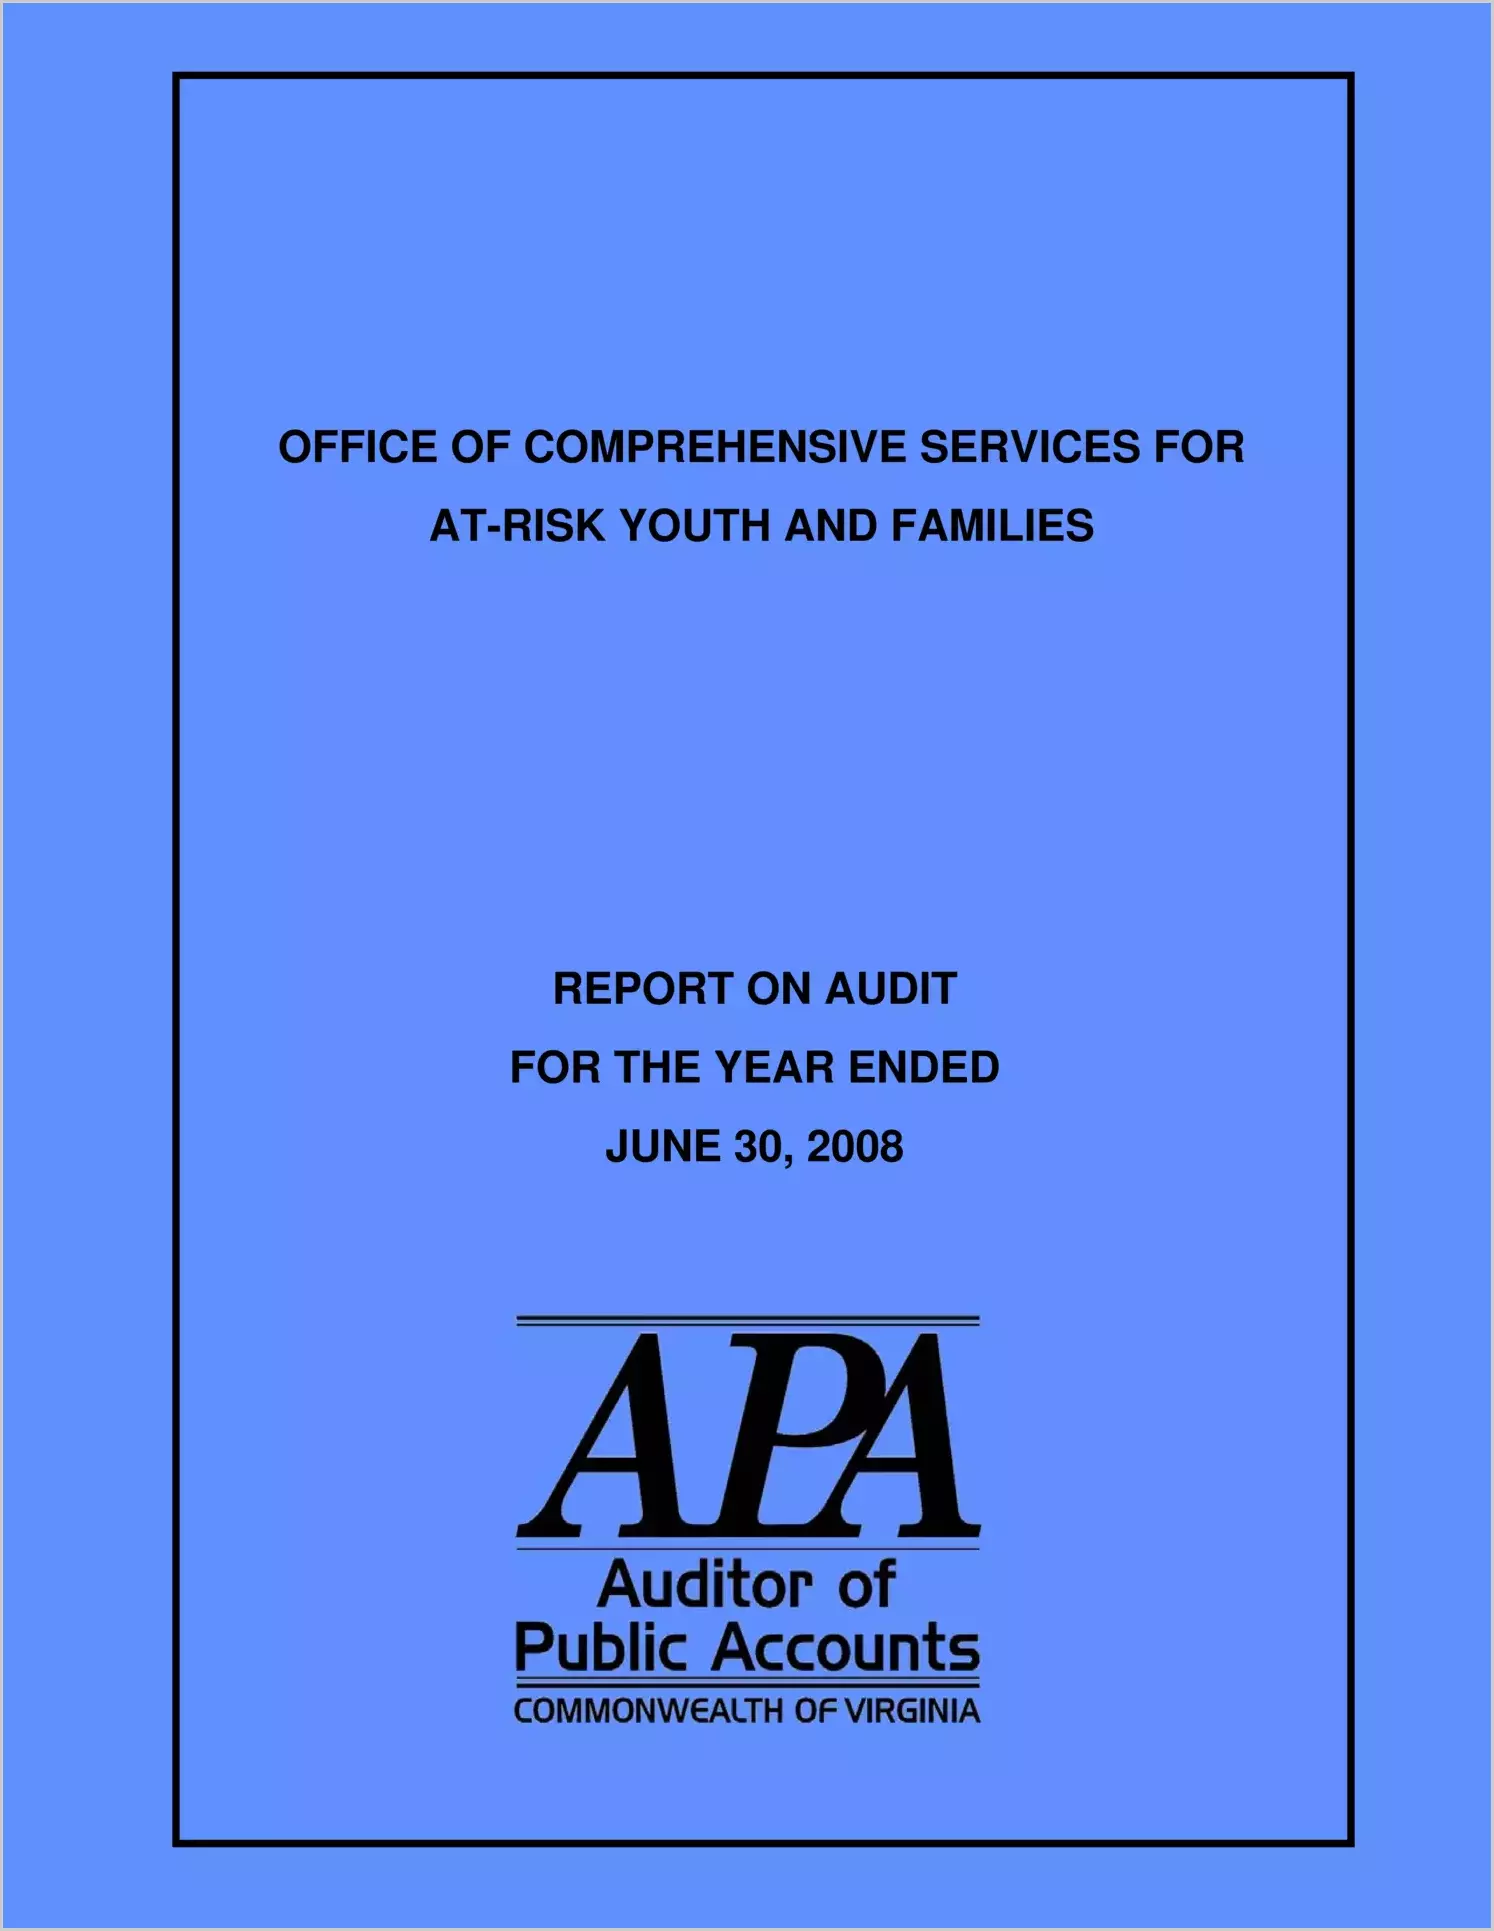 Office of Comprehensive Services for At-Risk Youth and Families for the year ended June 30, 2008